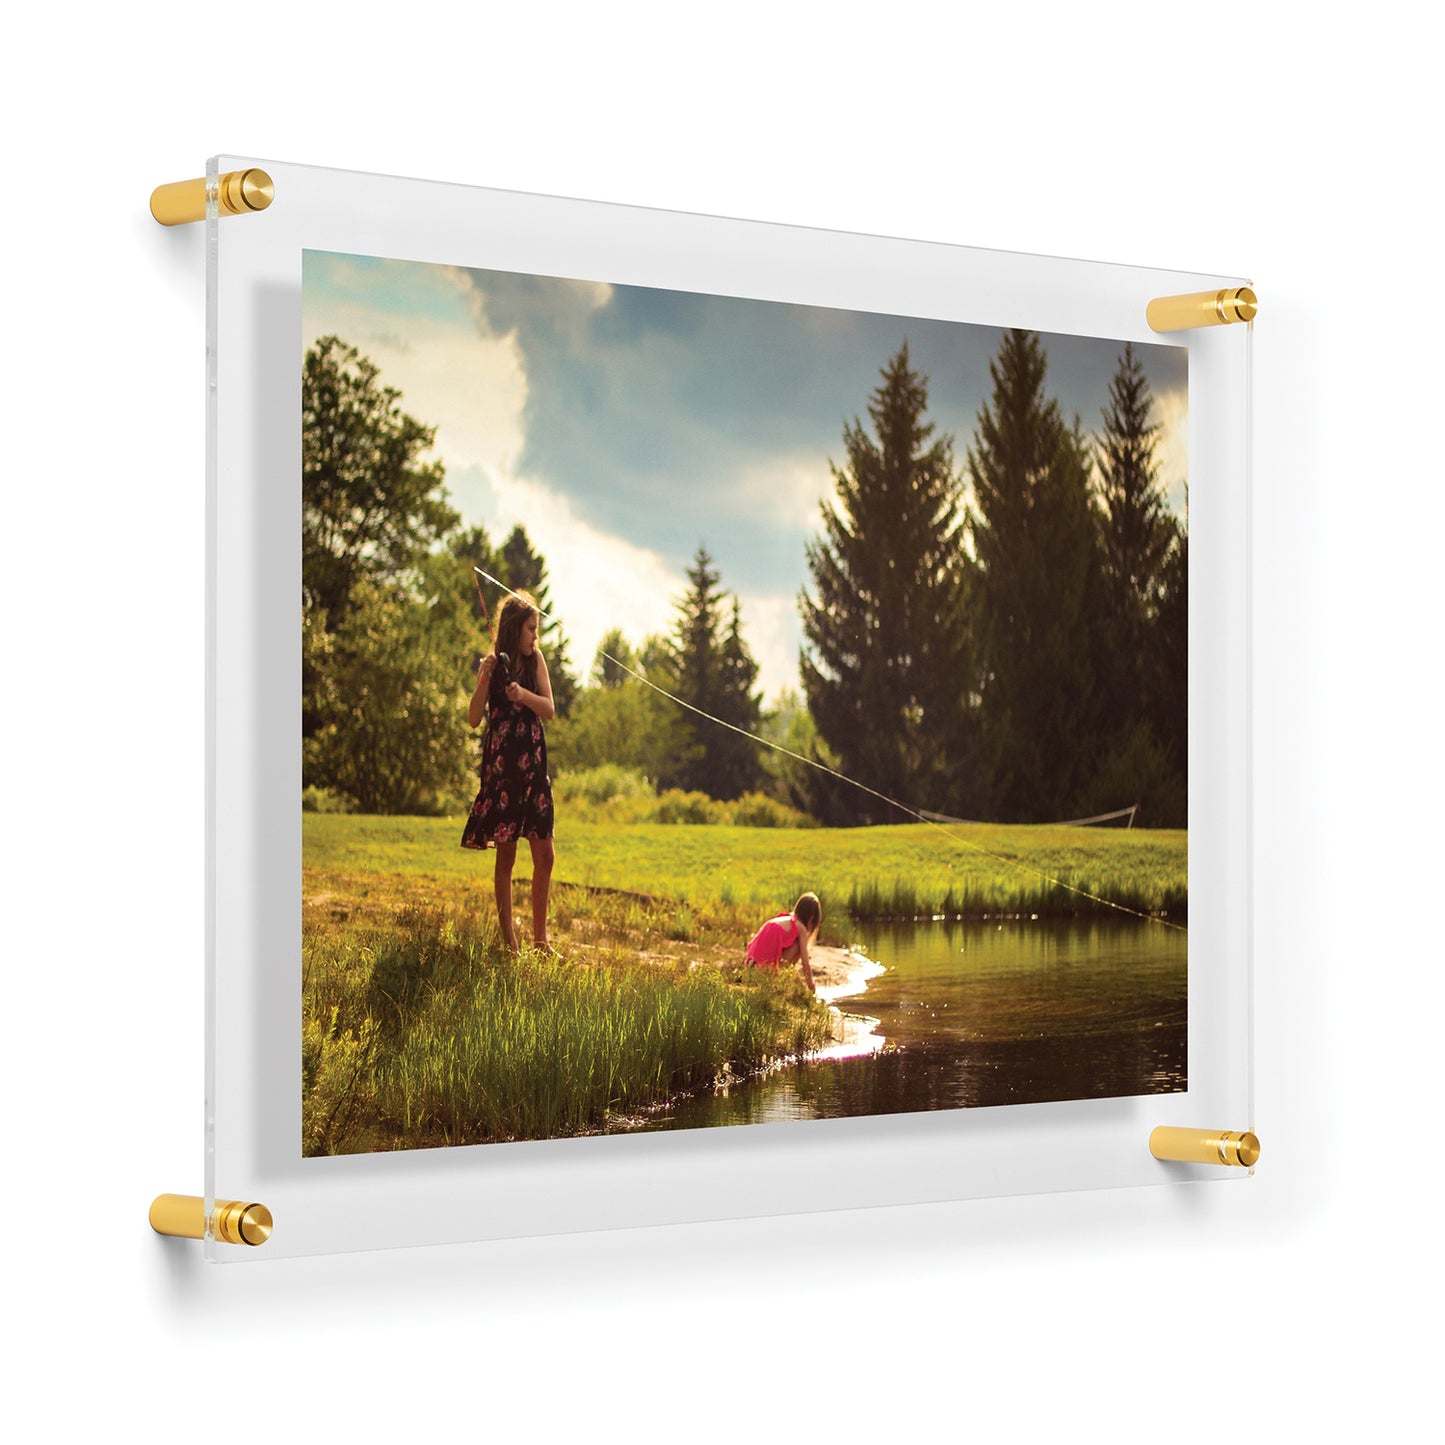 11x17" Photo Floating Acrylic Clear Picture Frame (Frame Size 15x21")